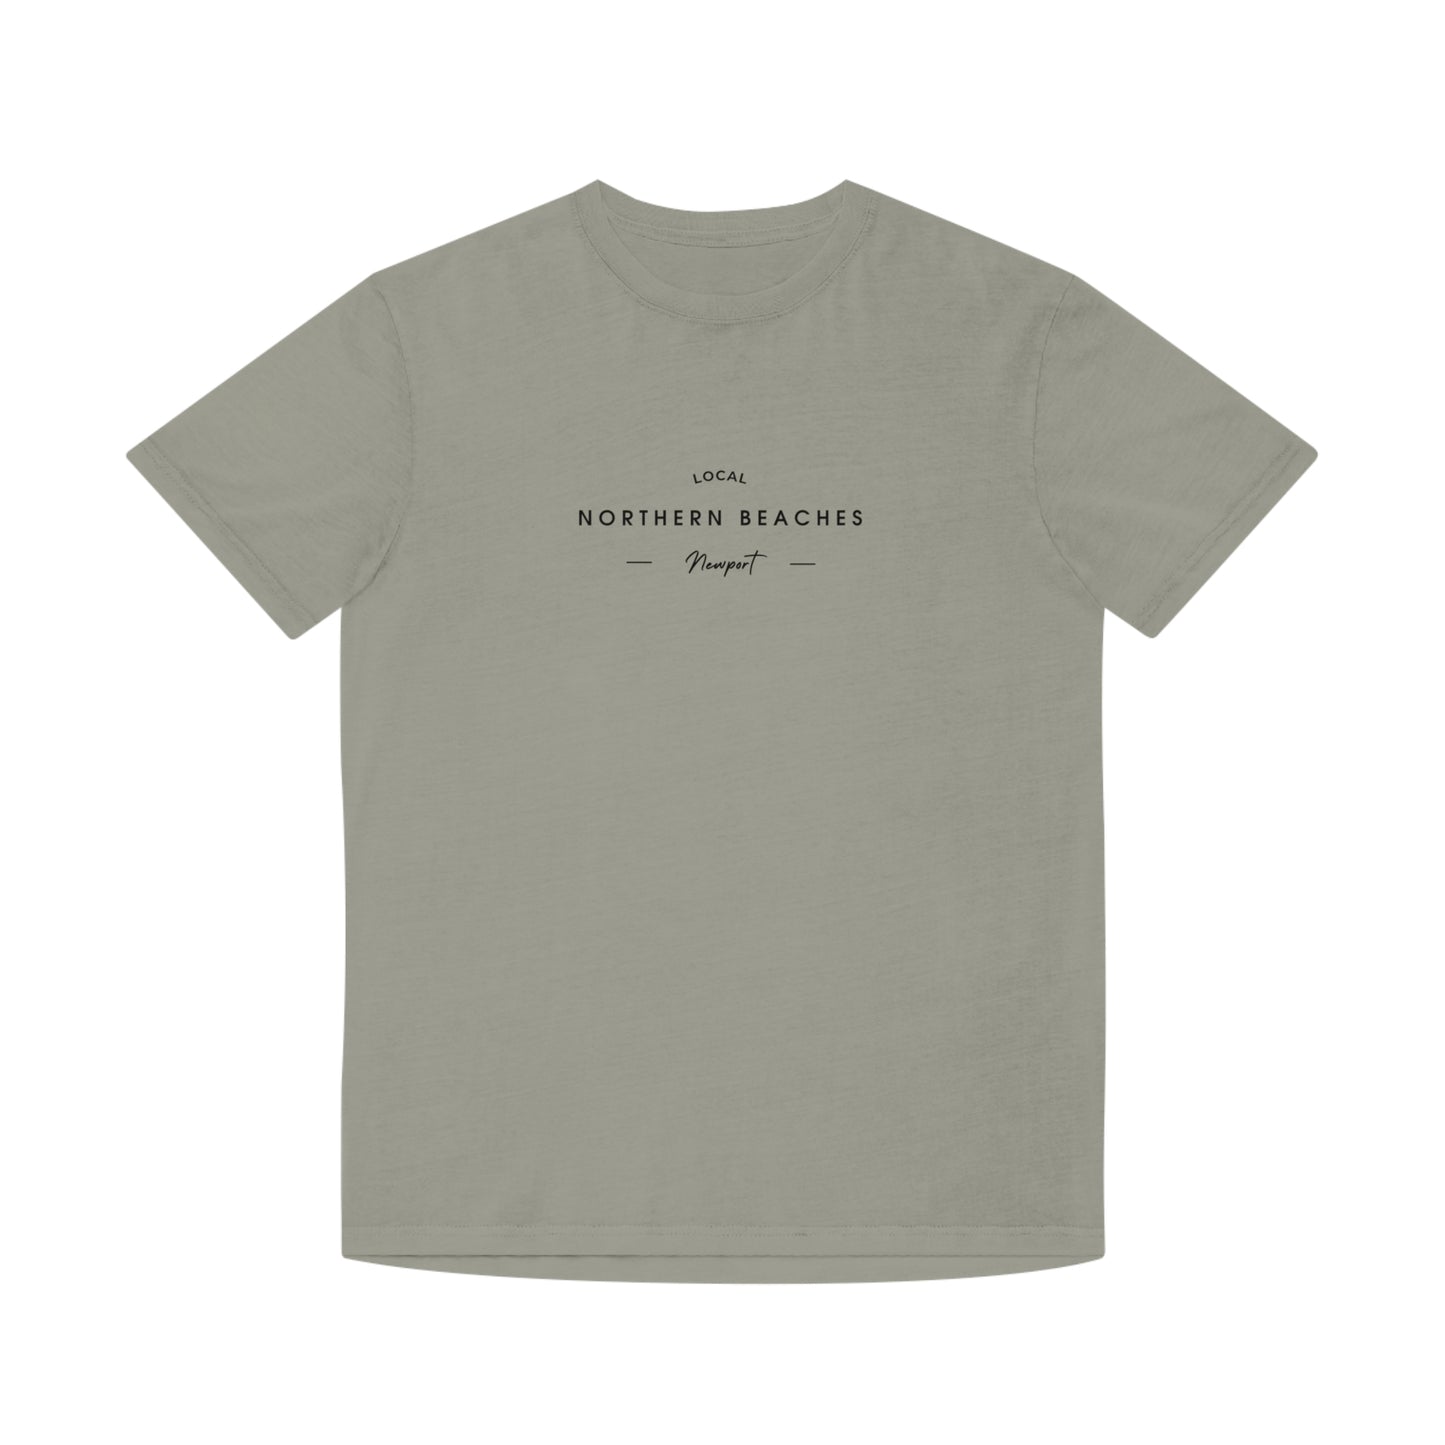 Northern Beaches Newport AS Colour 100% Cotton Unisex Faded Shirt